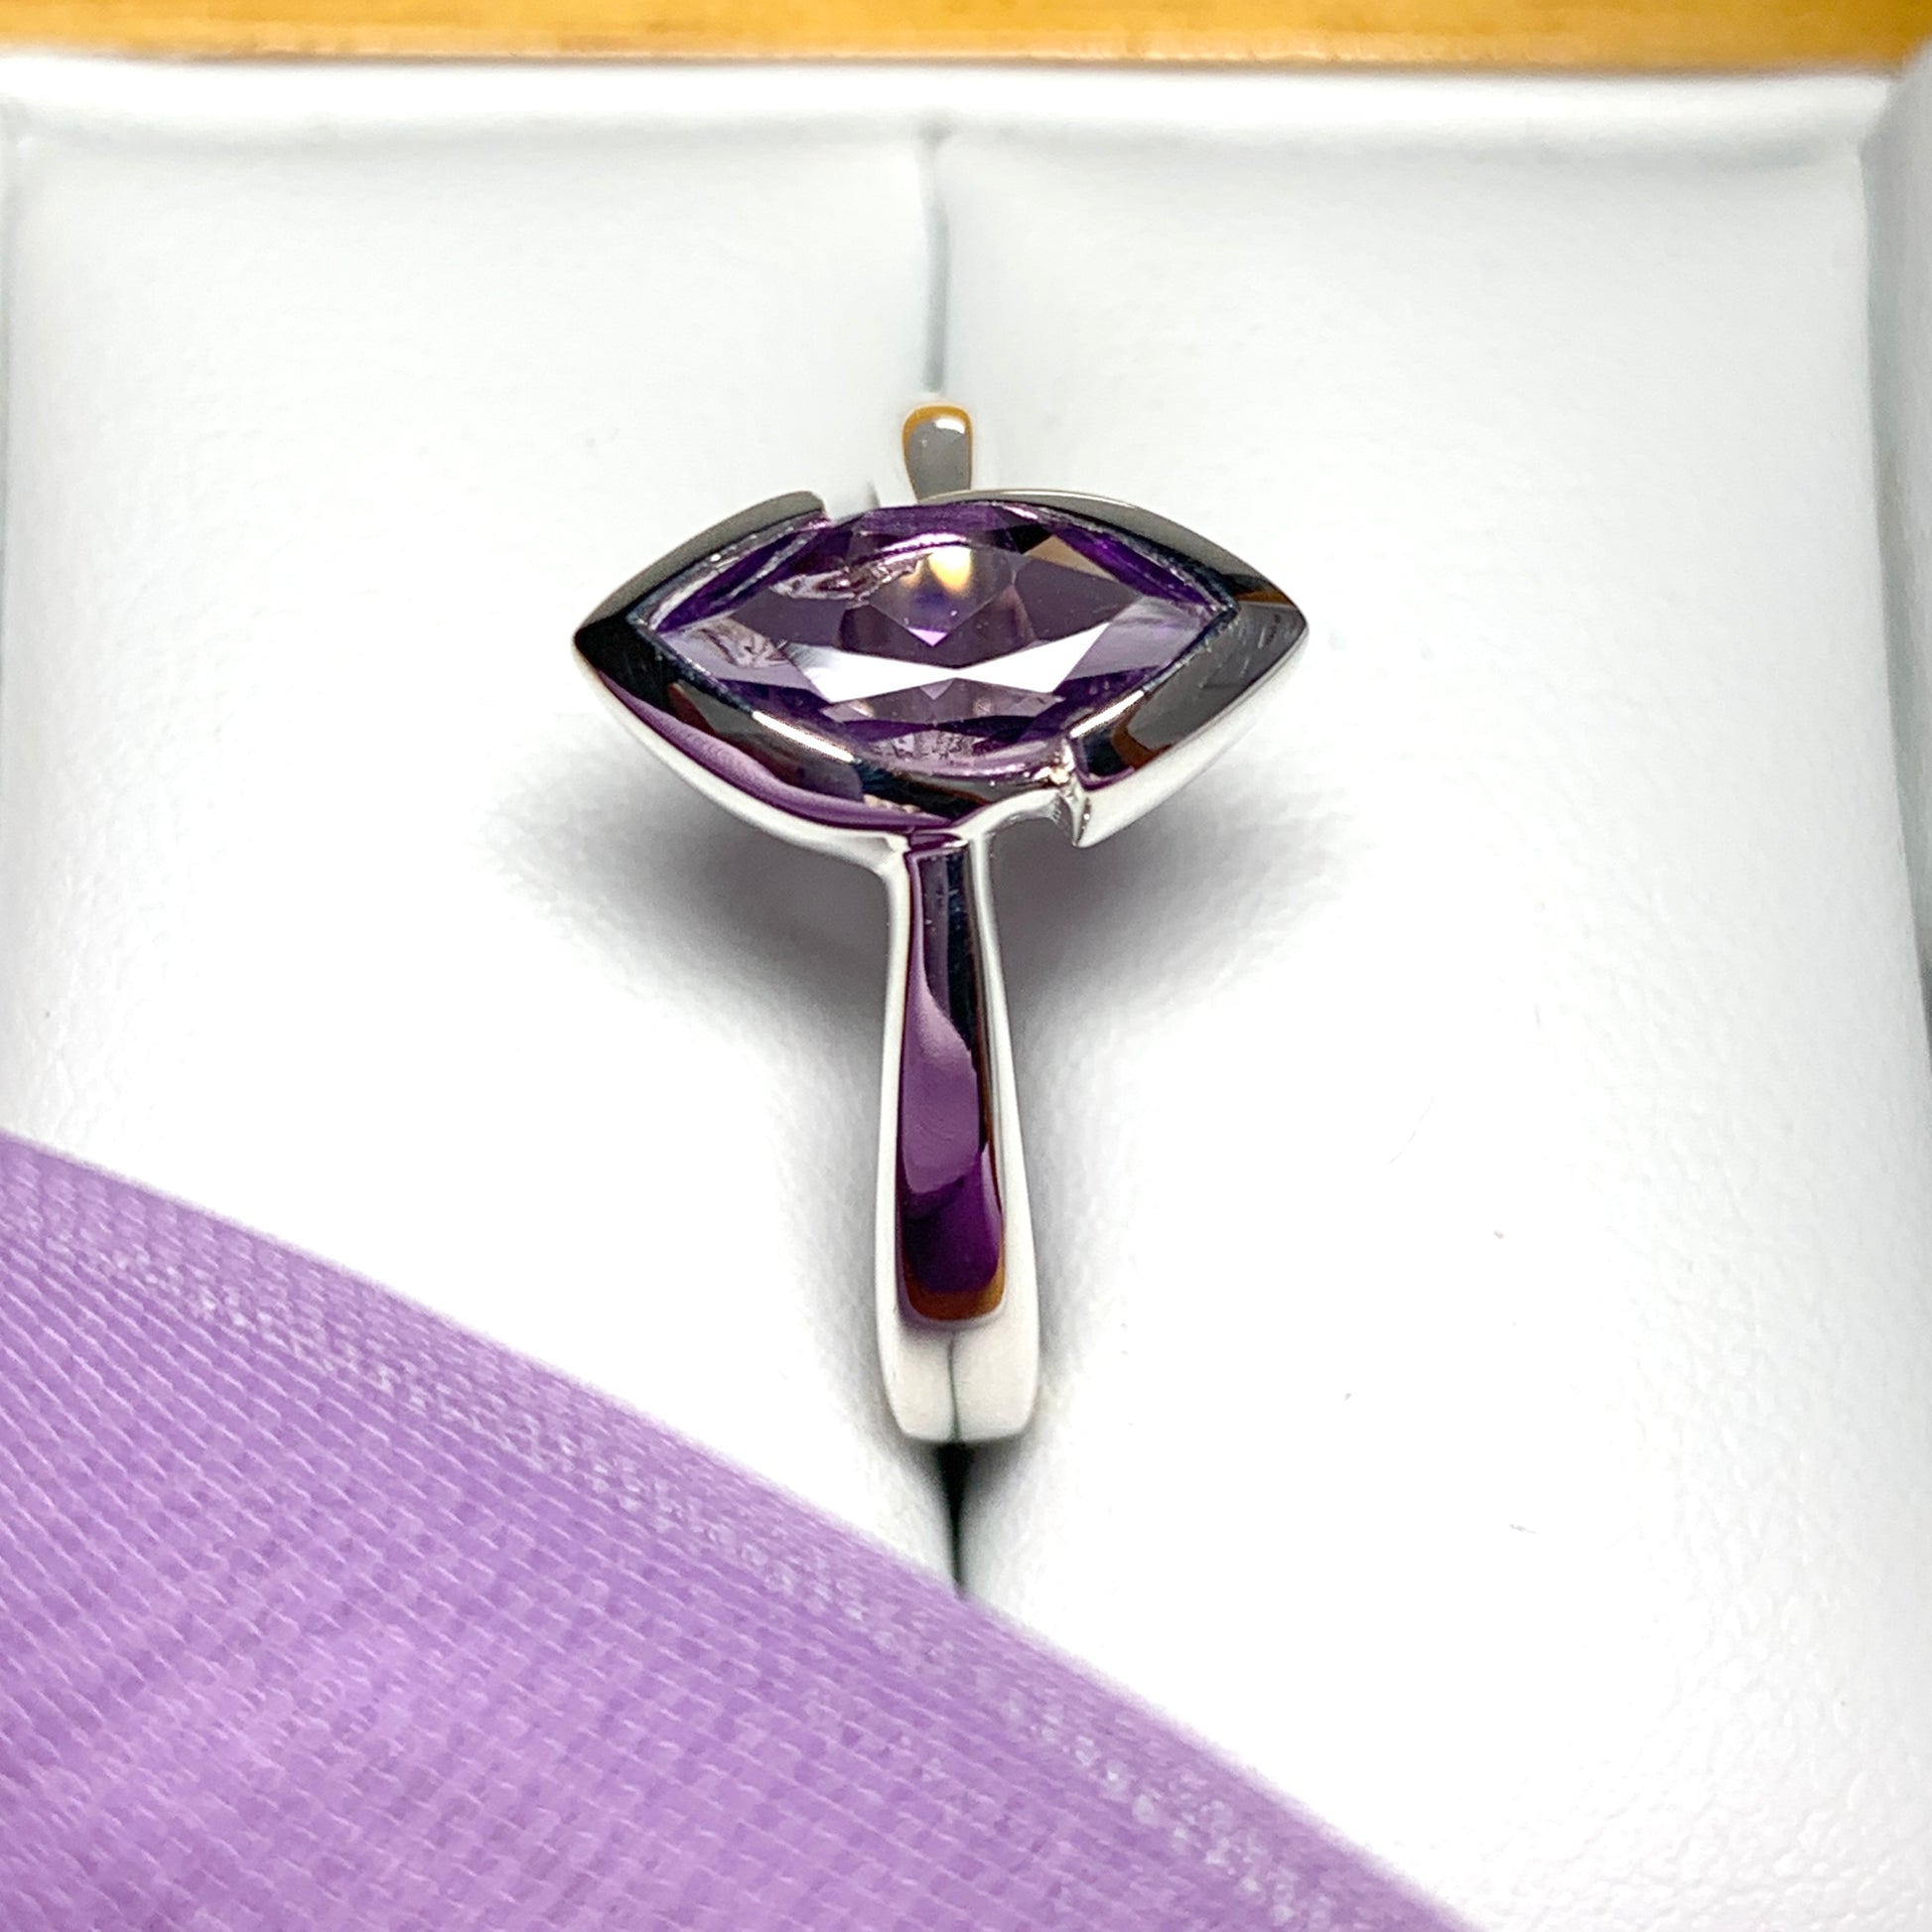 Marquise shaped amethyst sterling silver fancy dress cocktail ring